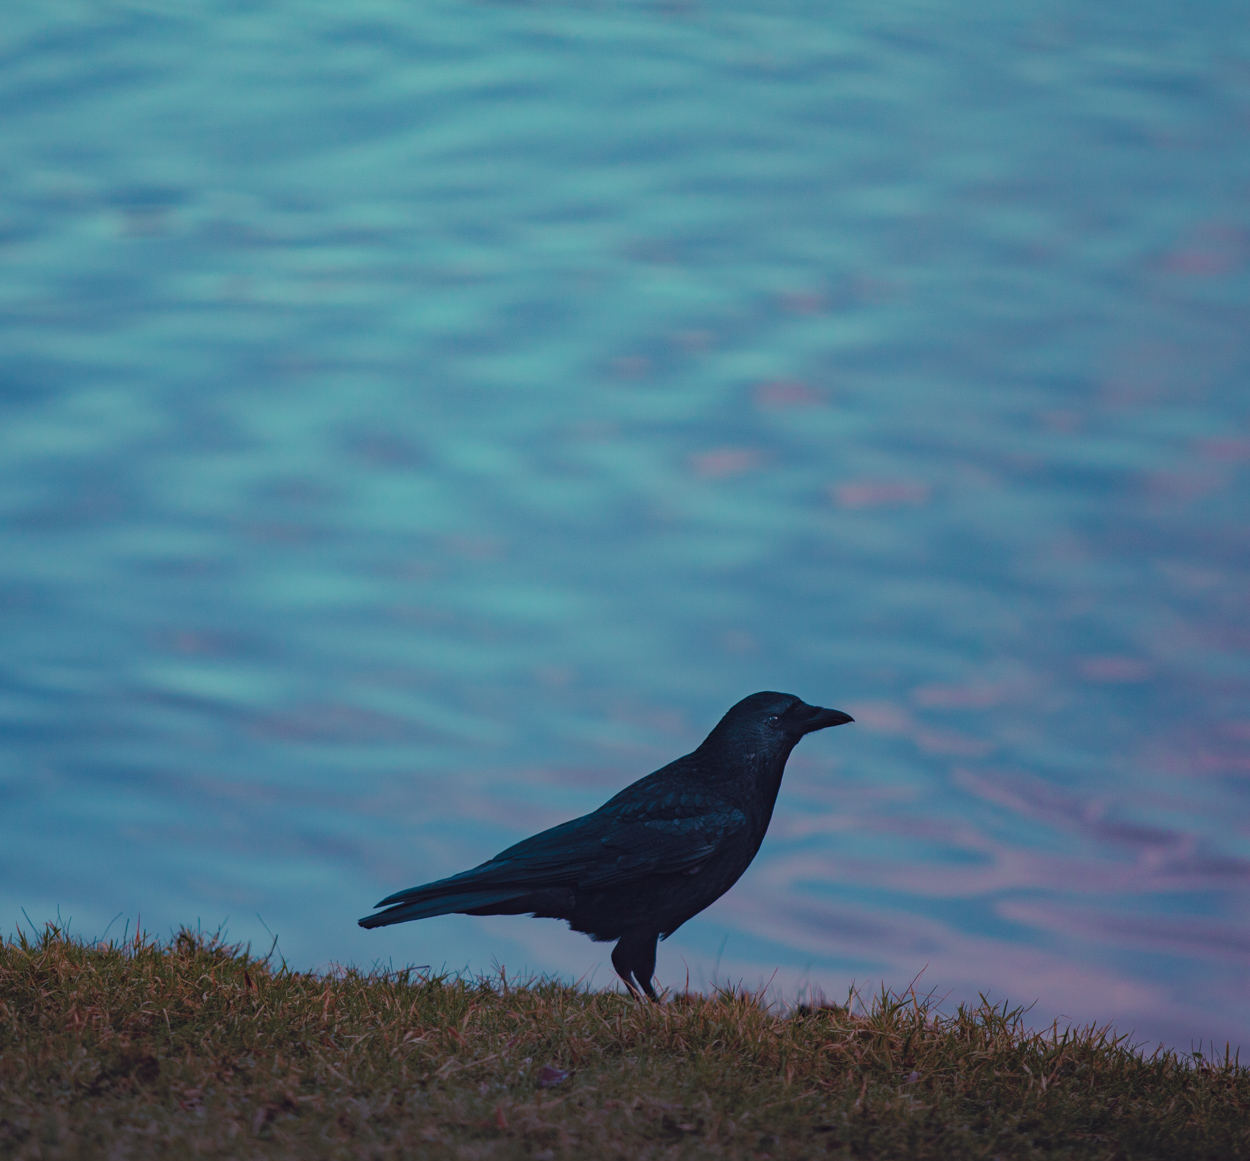 The Crow by the Lake